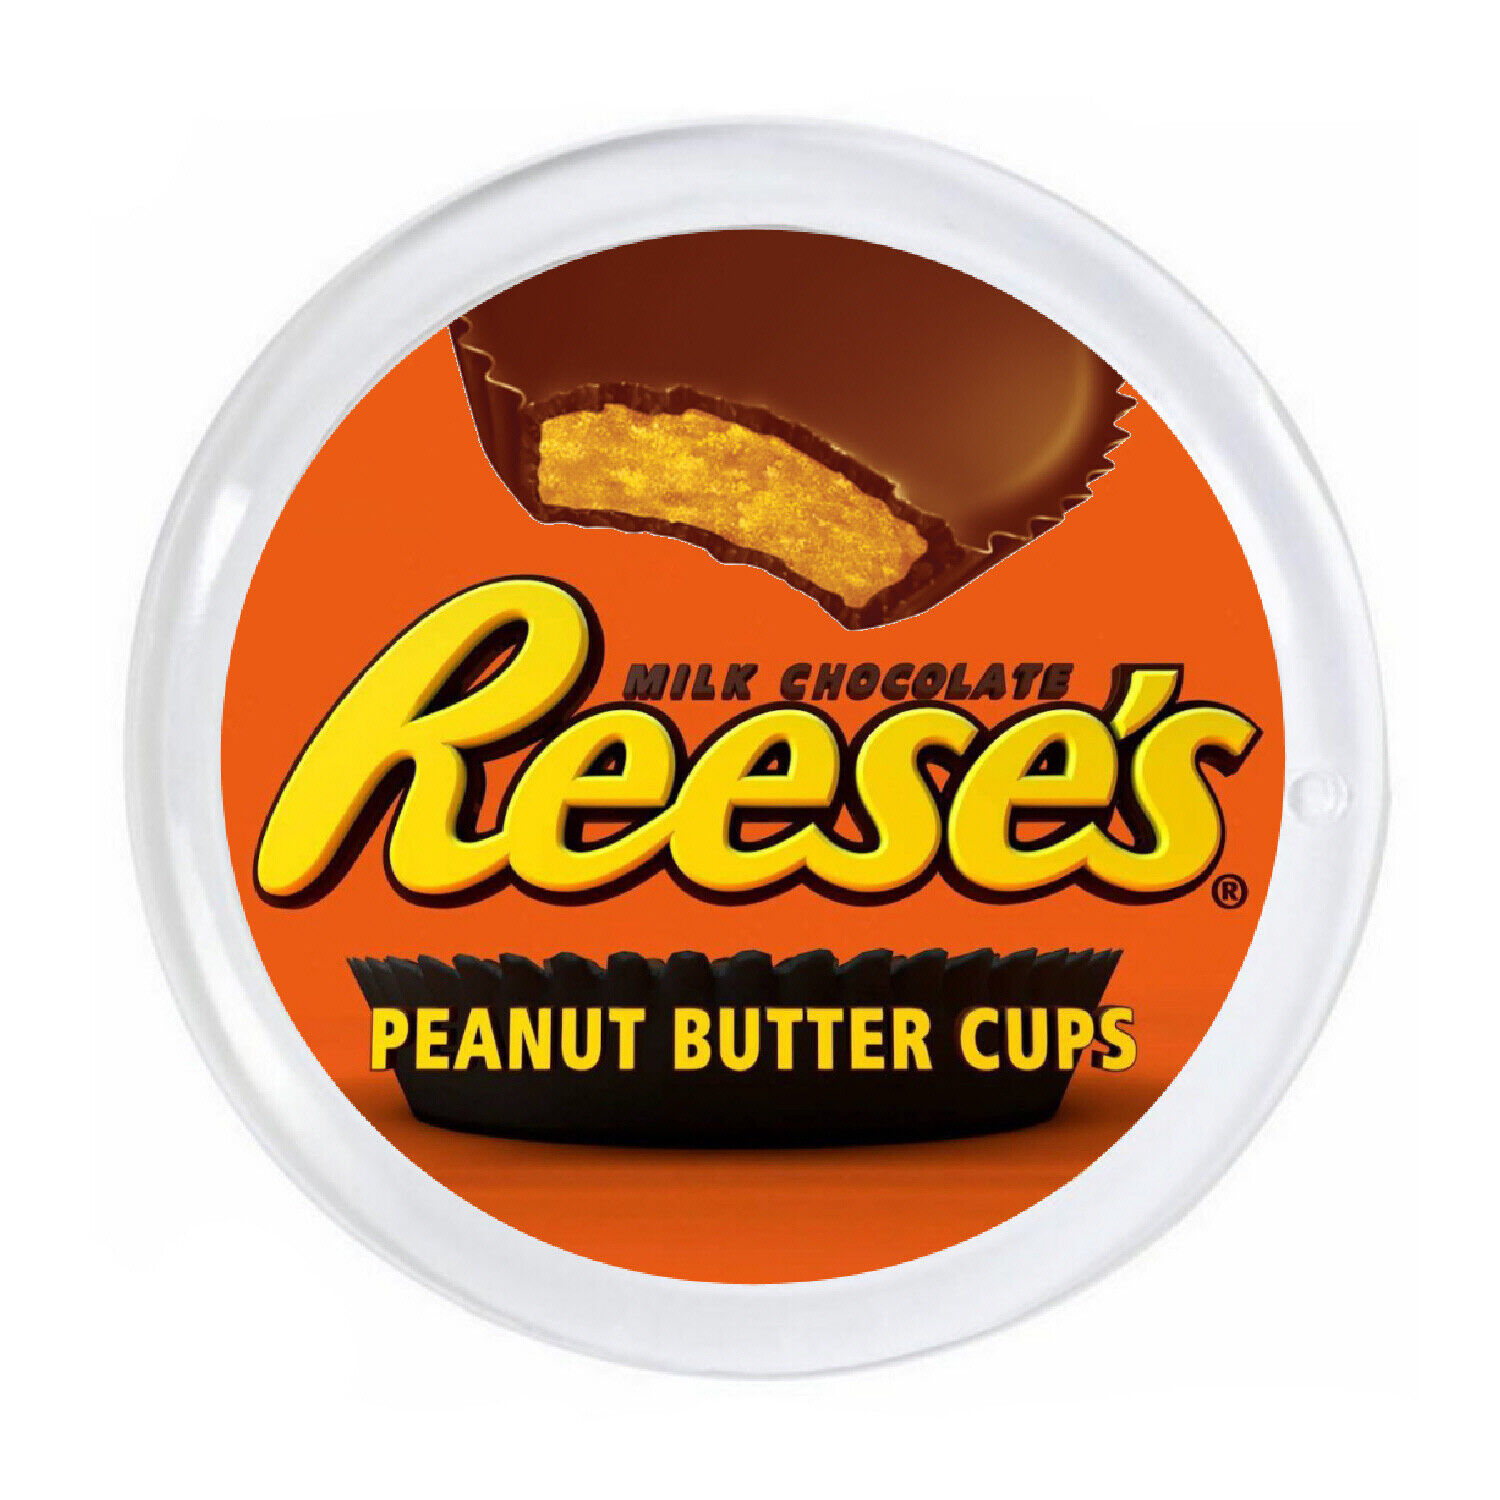 Reese\'s Peanut Butter Cups Magnet big round 3 inch diameter